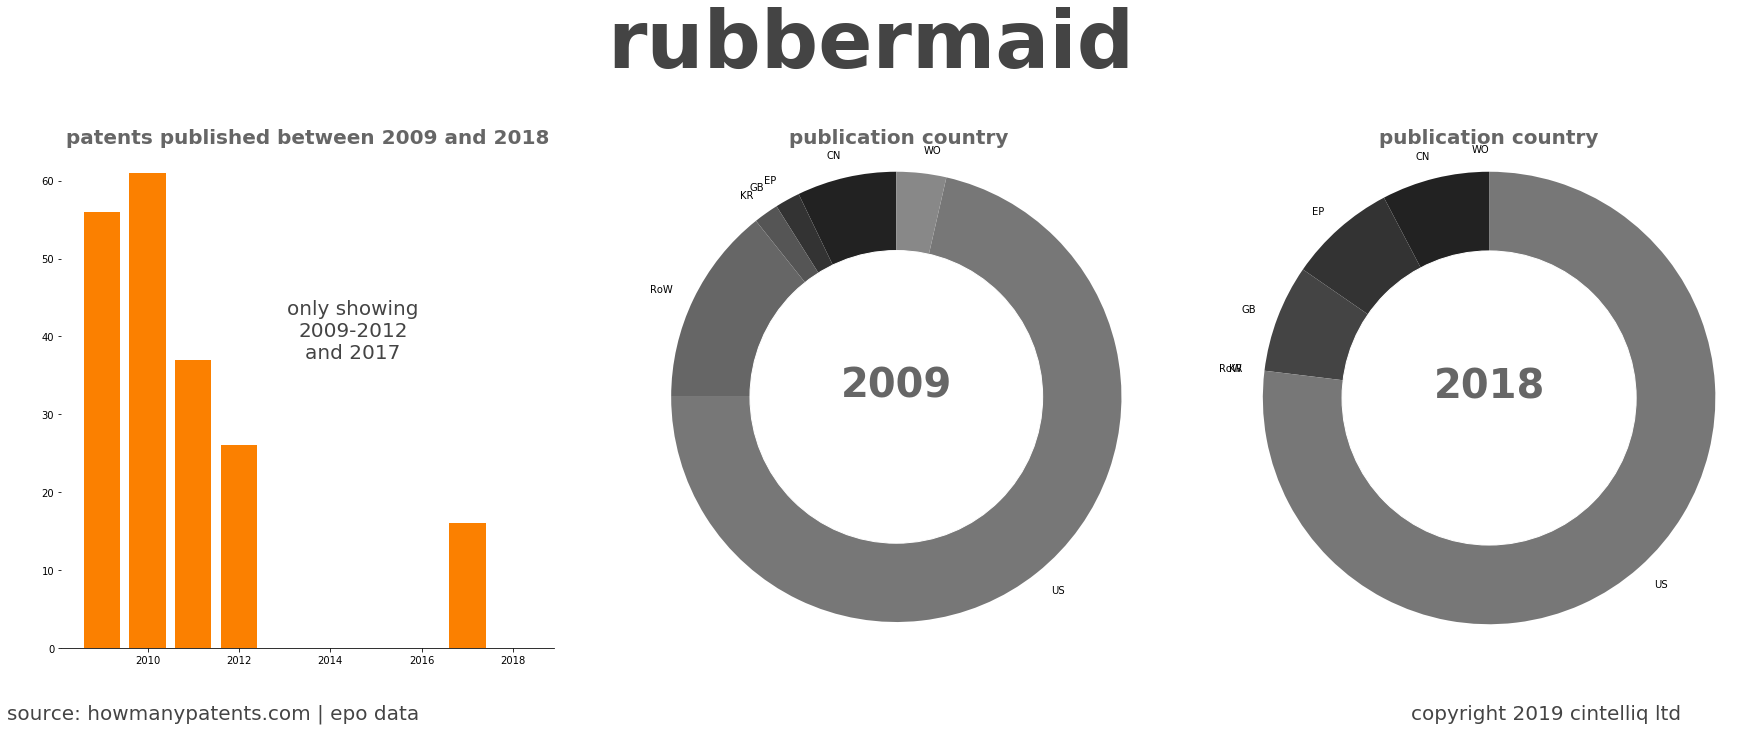 summary of patents for Rubbermaid